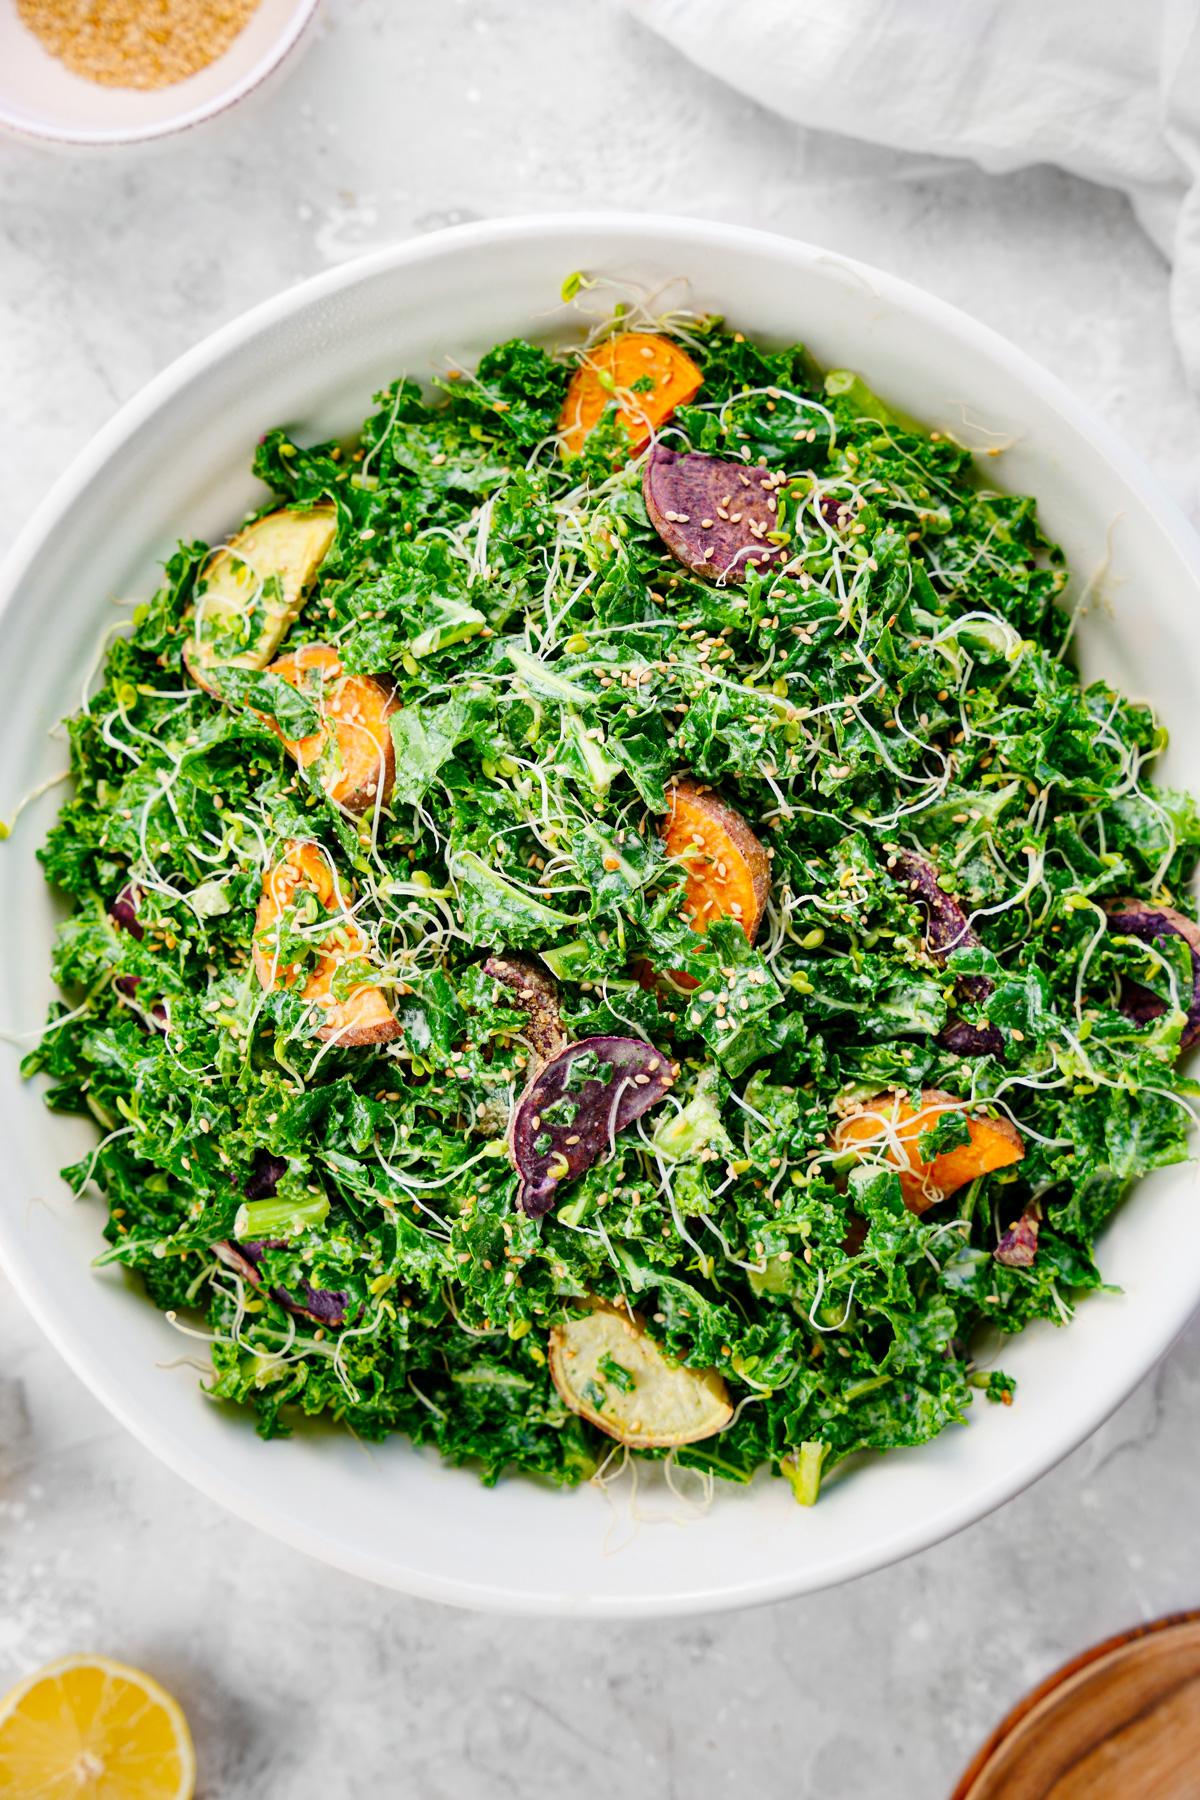 the kale salad with sprouts, sesame seeds, and rainbow sweet potatoes